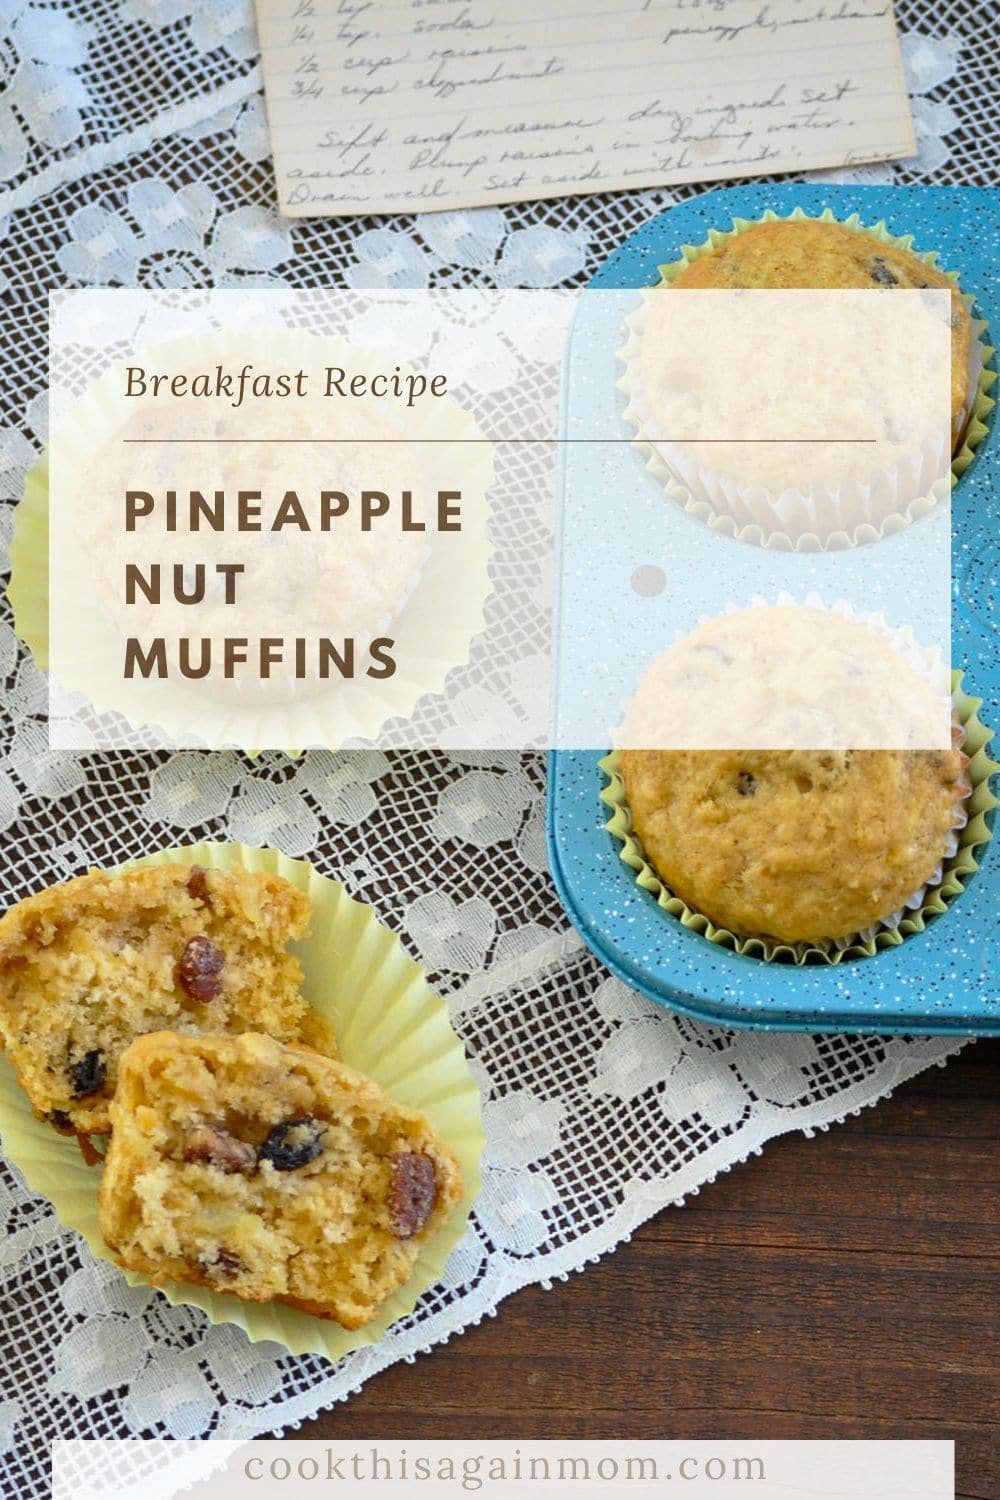 a pineapple muffin split in two laying on a lace table runner next to the pan of muffins and recipe card